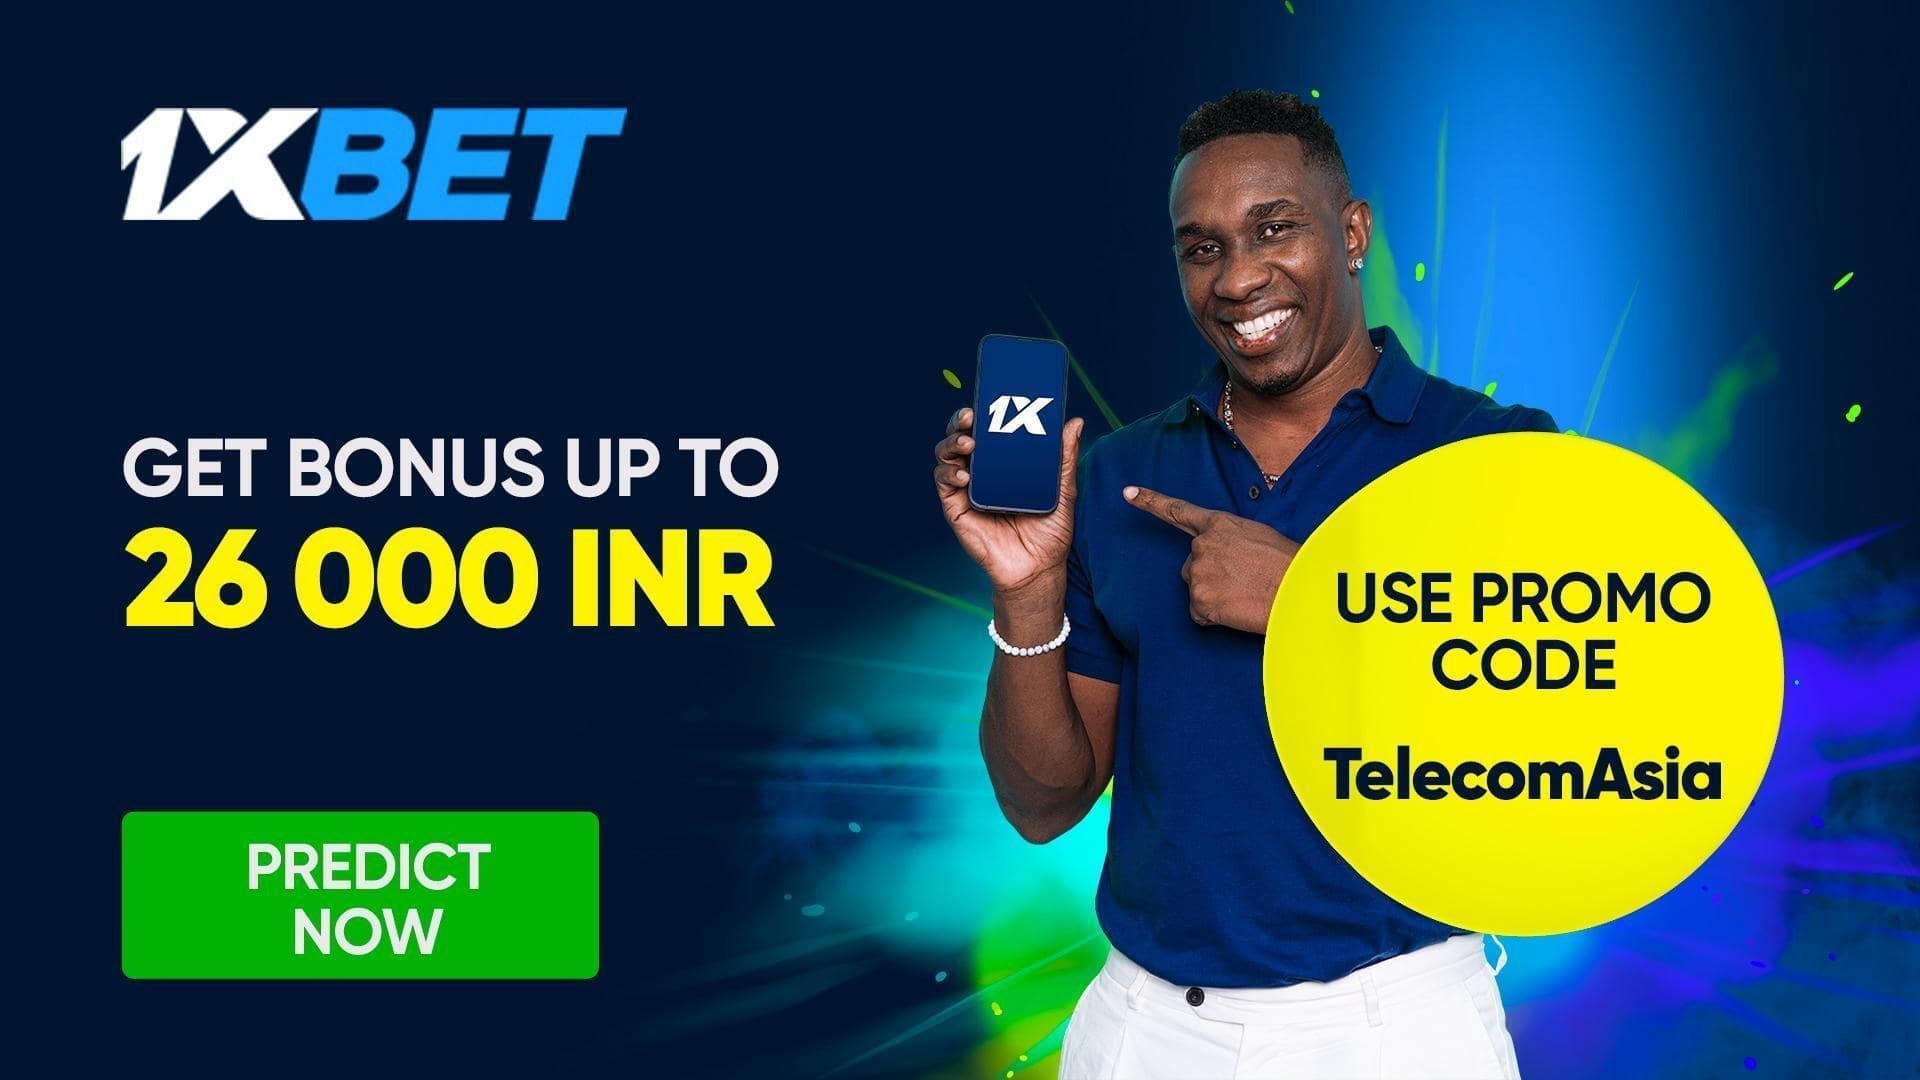 The Ultimate Guide To 1xbet in